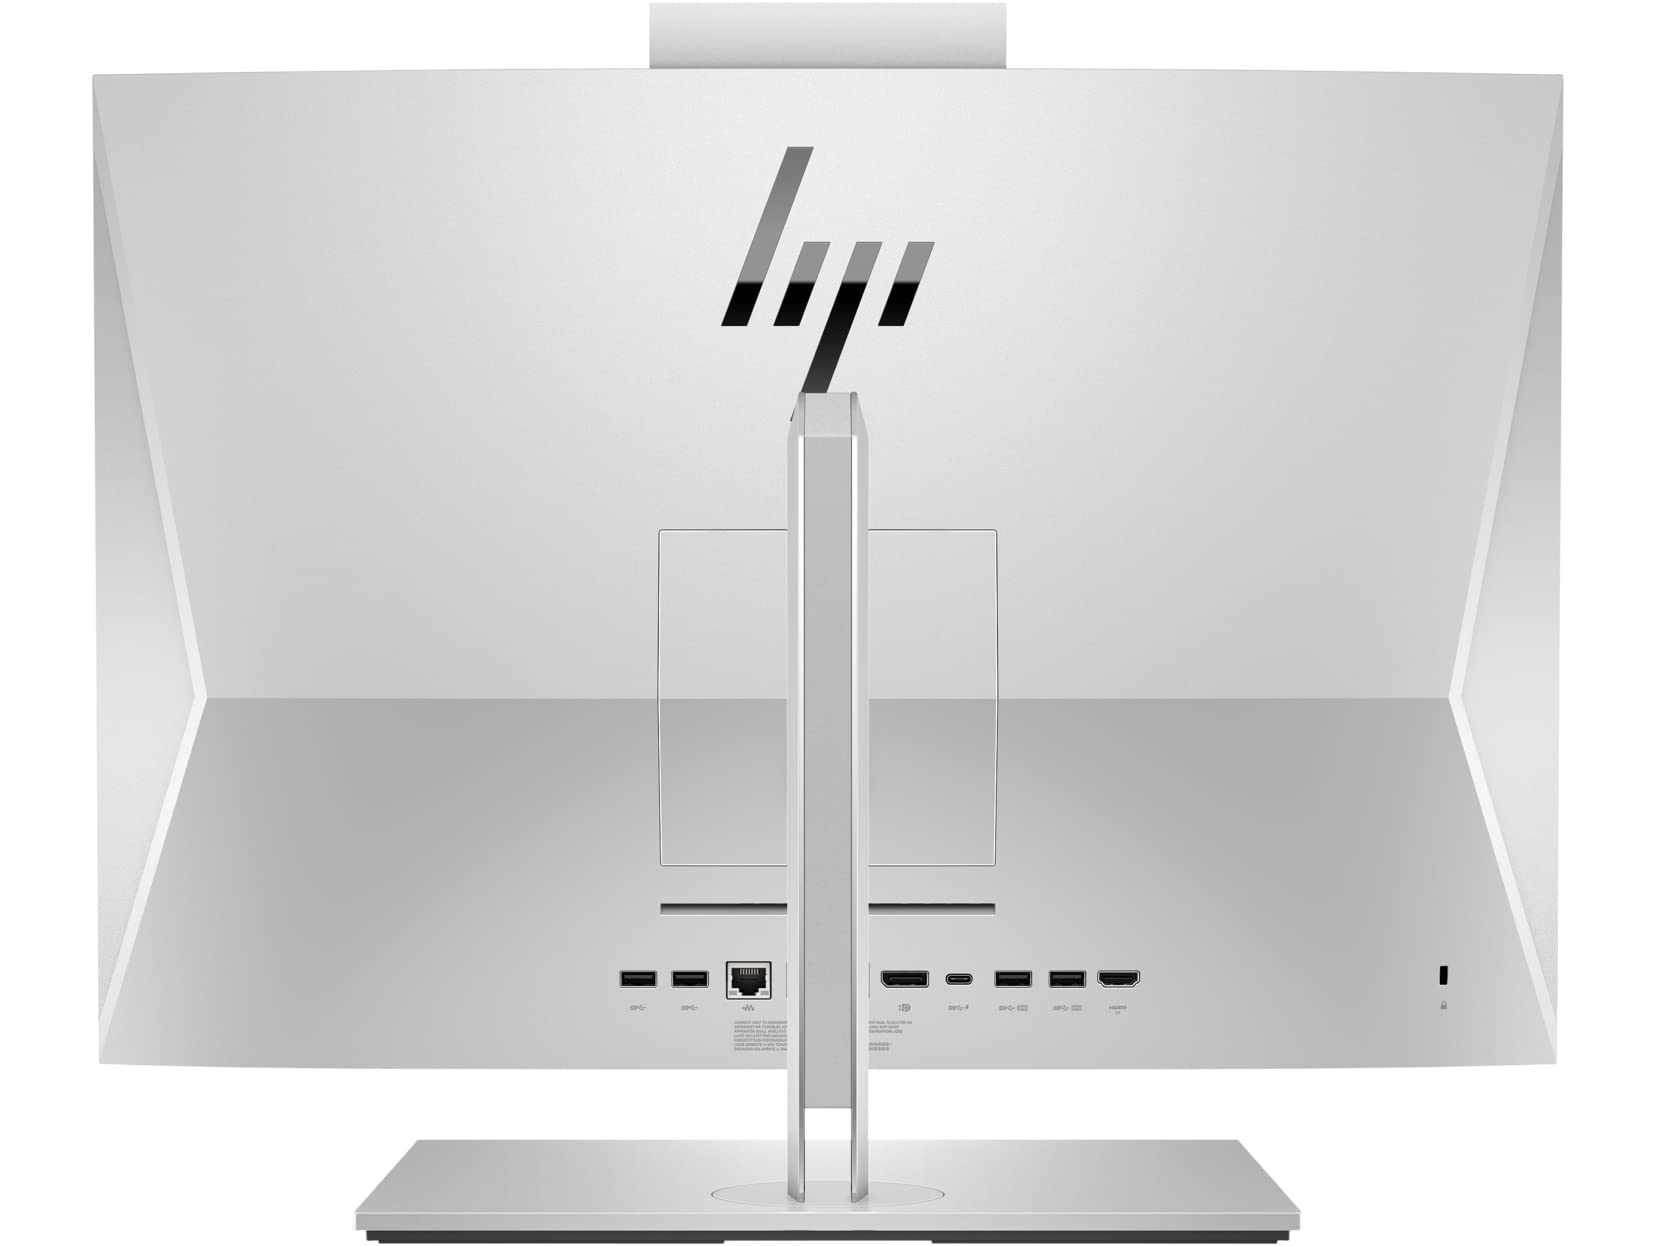 HP EliteOne 800 G6 All-in-One Computer, 23.8 IPS, FHD, Intel i7-10700, Bang & Olufsen with Stereo Speakers, NO DVD-RW, Win 10 Pro, Silver, 3 Year Warranty (16GB RAM | 1TB SSD)